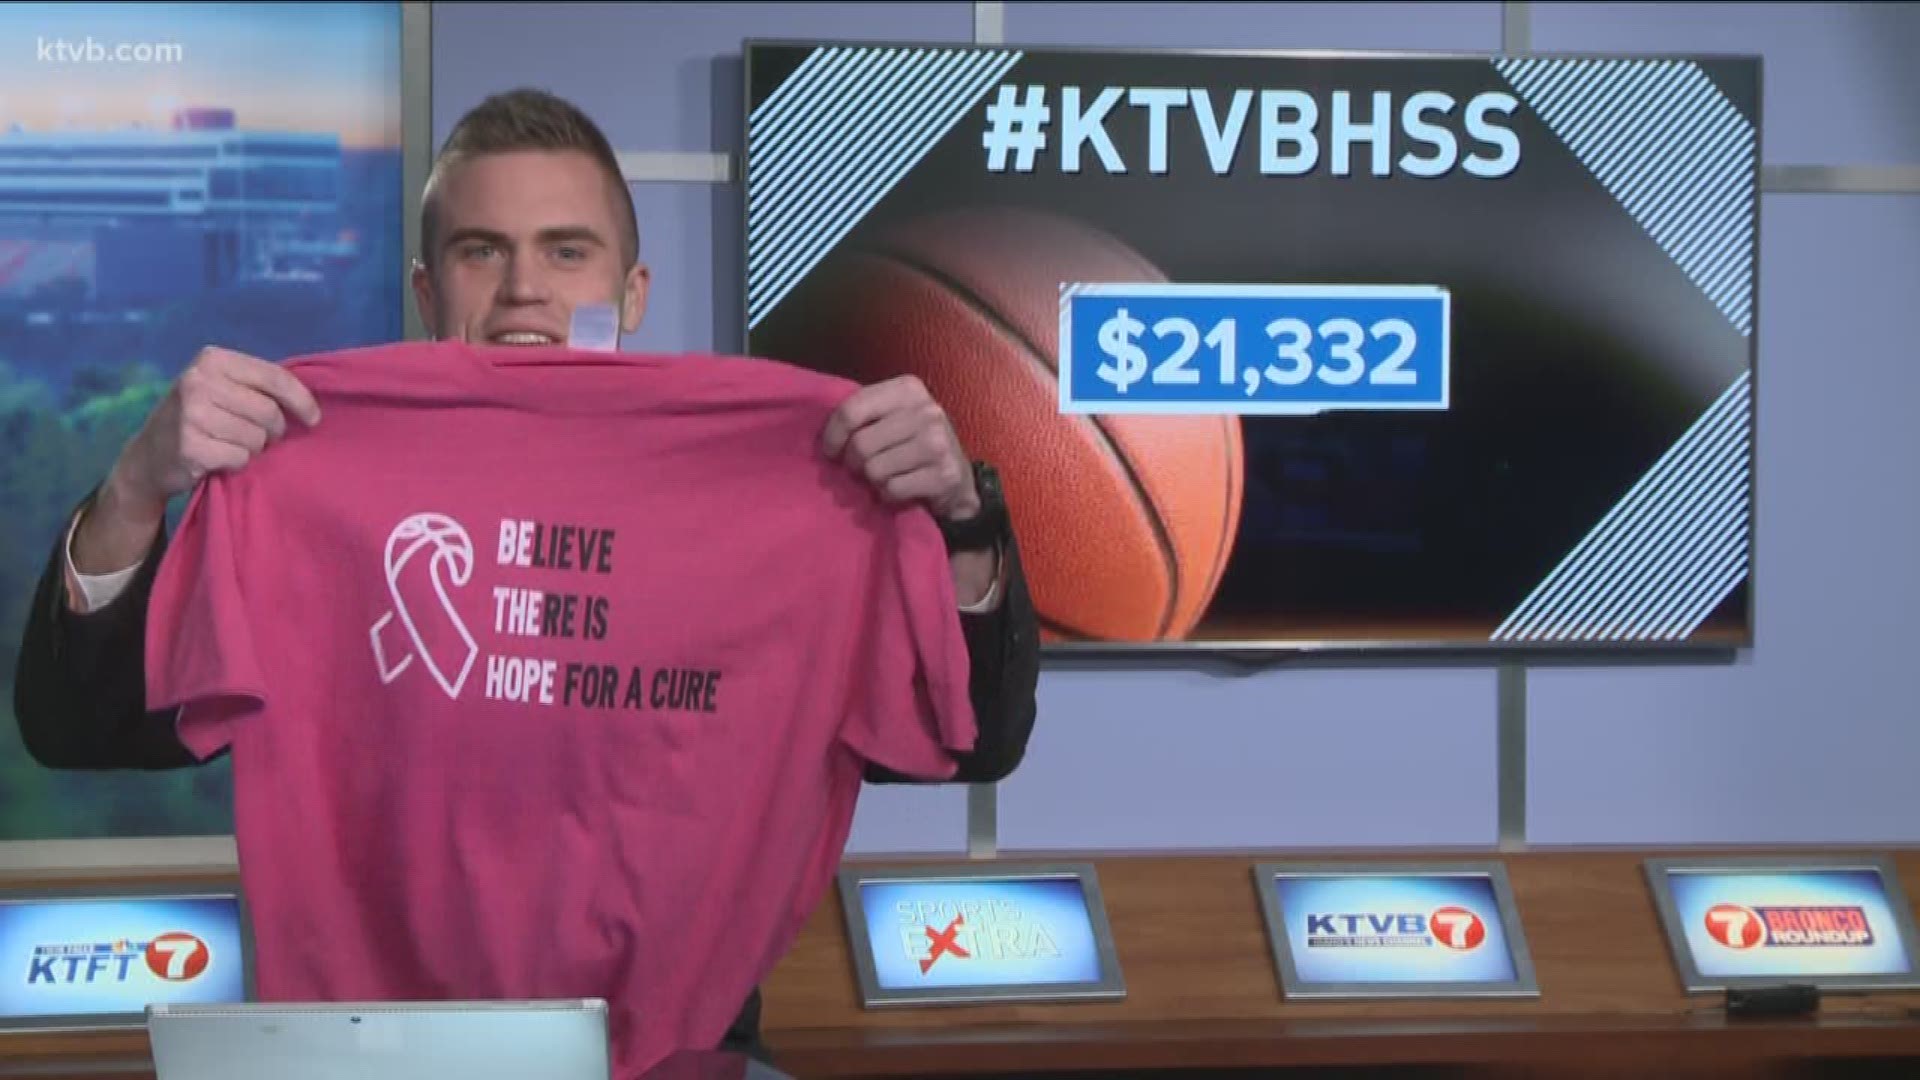 The Boise High School girls basketball program has raised over $20,000 for the Susan G. Komen Boise chapter in 11 years with their annual "Pink Zone" night.